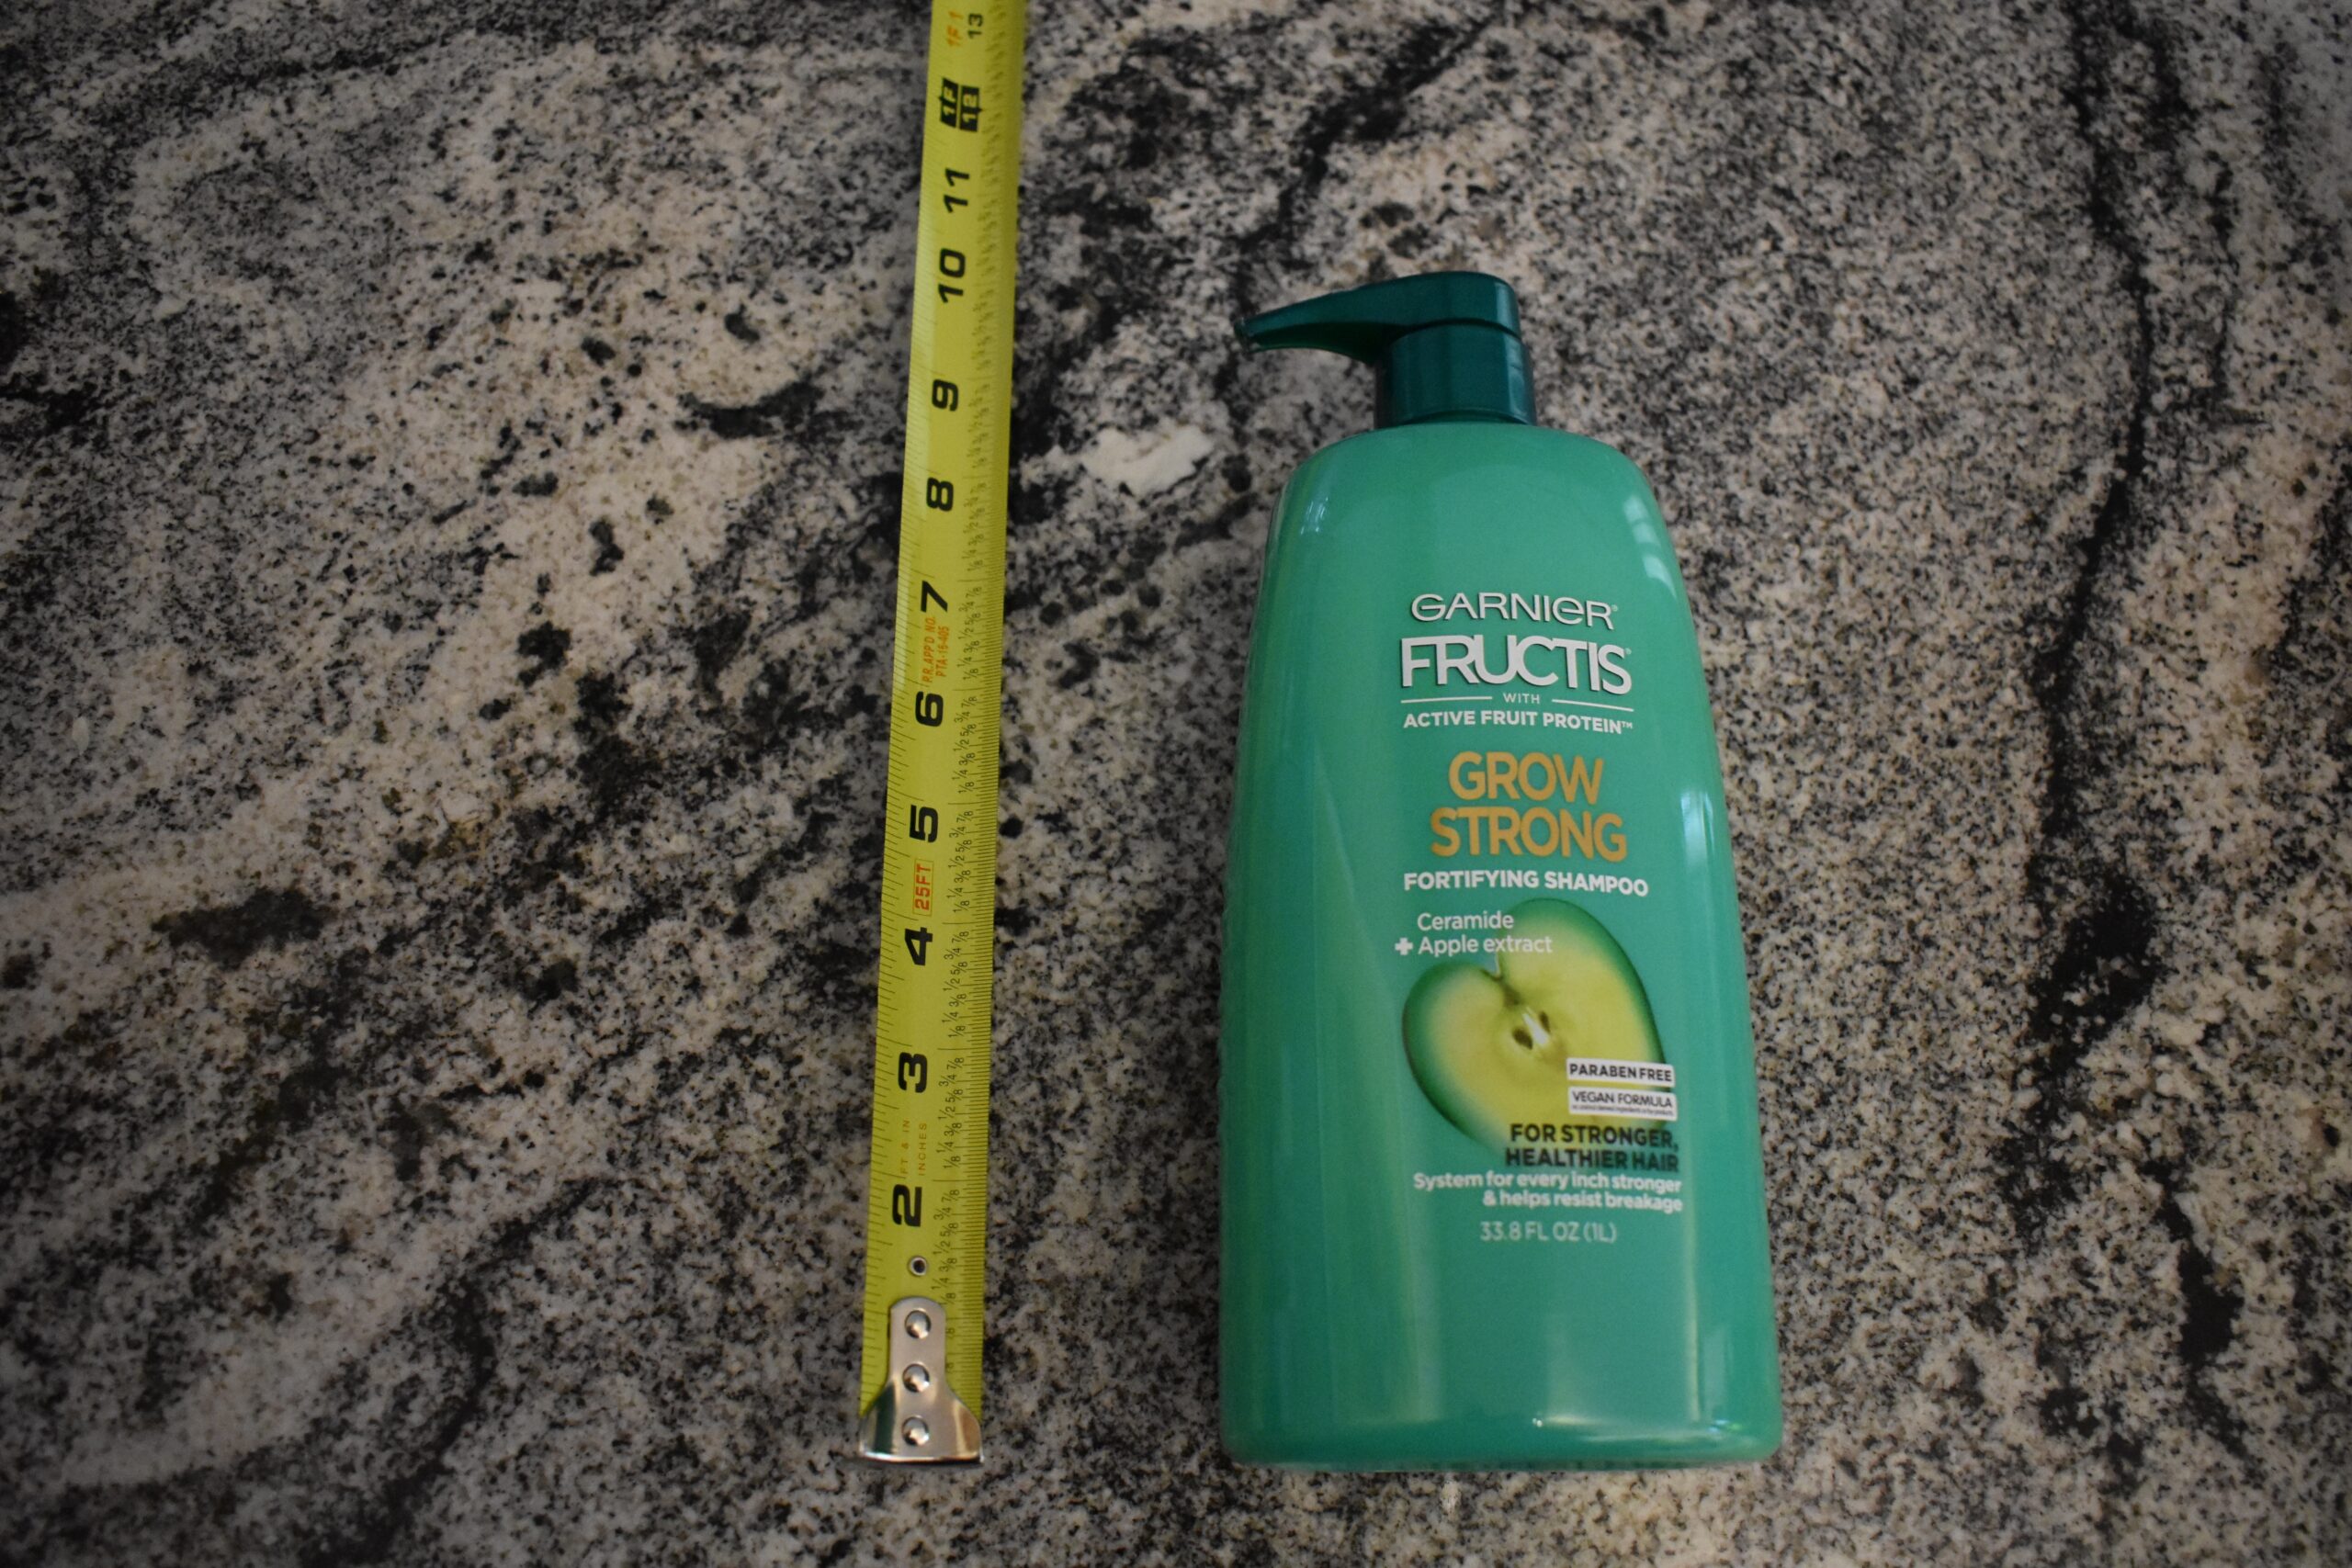 Garnier Fructis (best shampoo pick) on a grey granite counter sitting next to a measuring tape